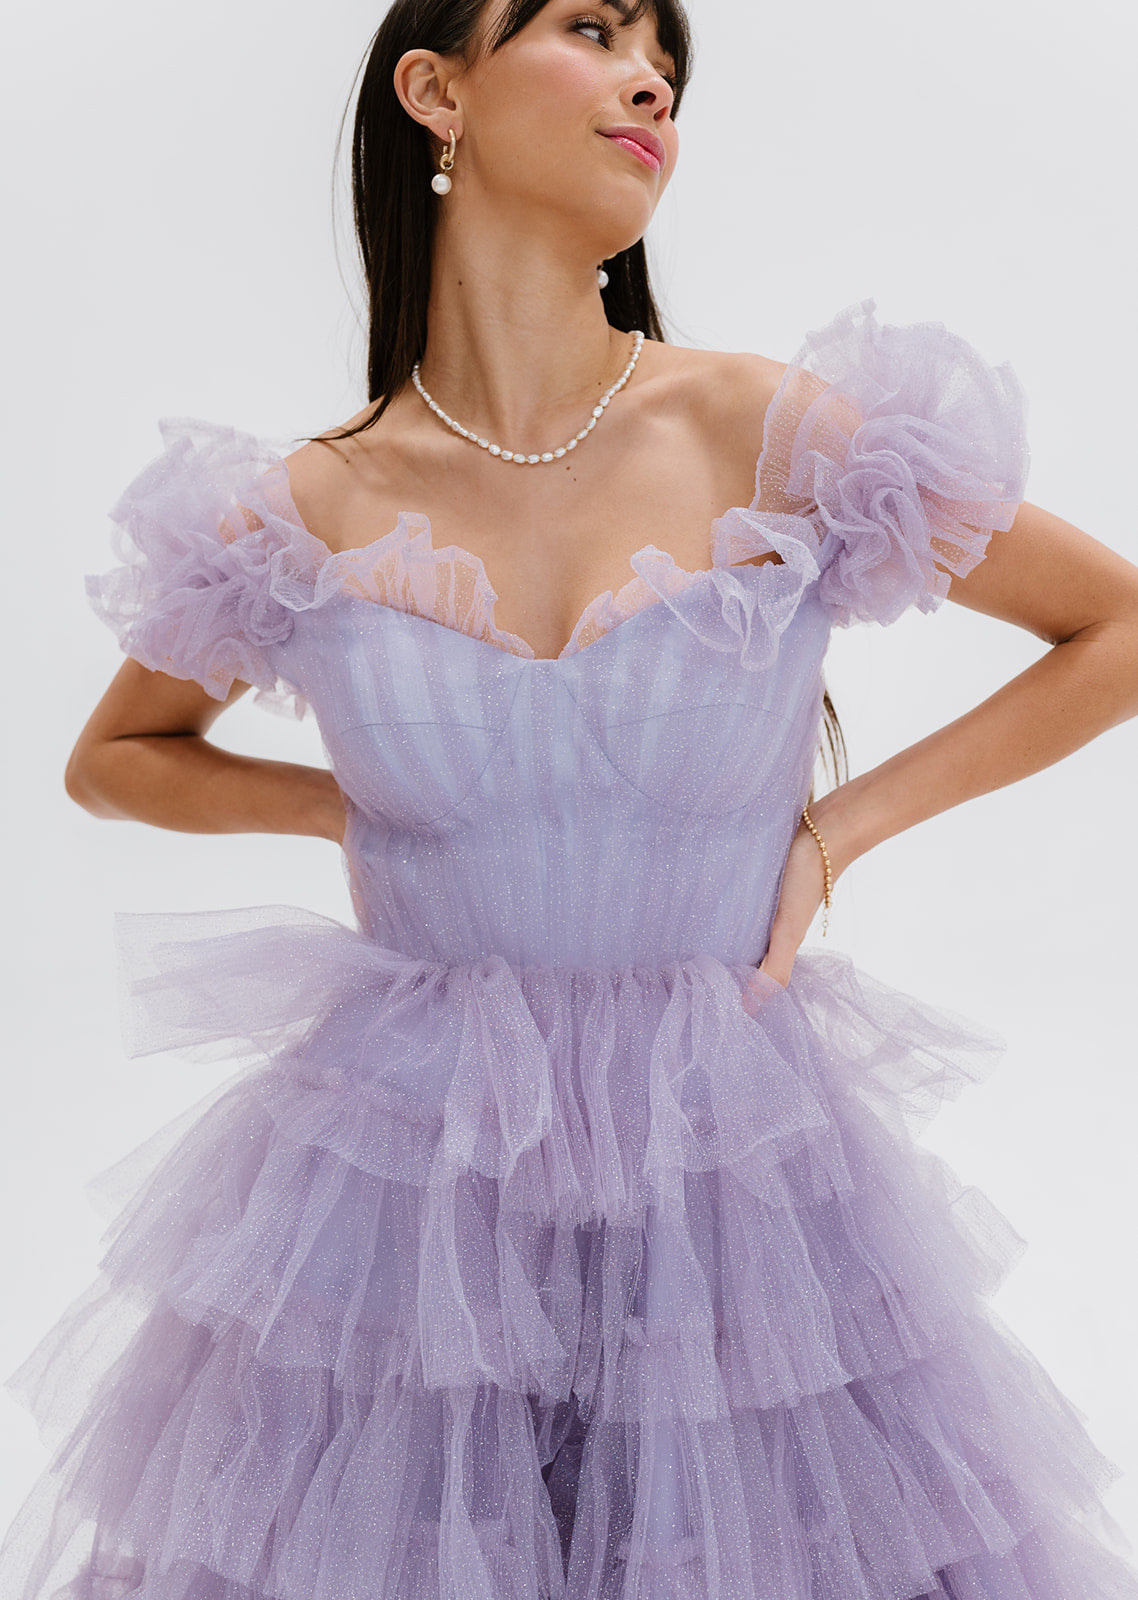 She's a Princess - Lavender | Ava Gowns